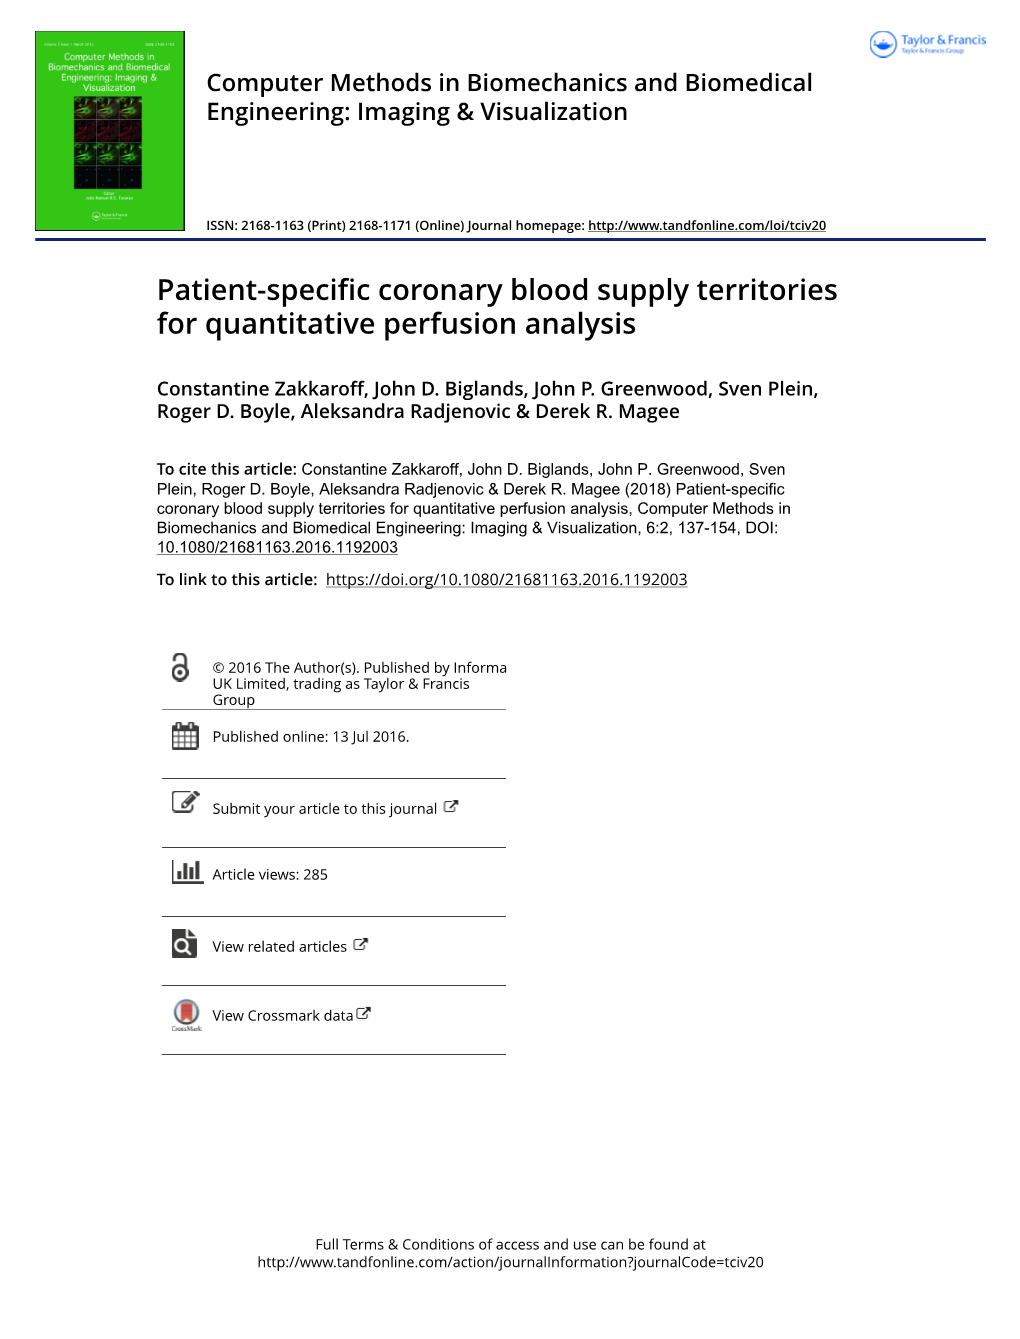 Patient-Specific Coronary Blood Supply Territories for Quantitative Perfusion Analysis